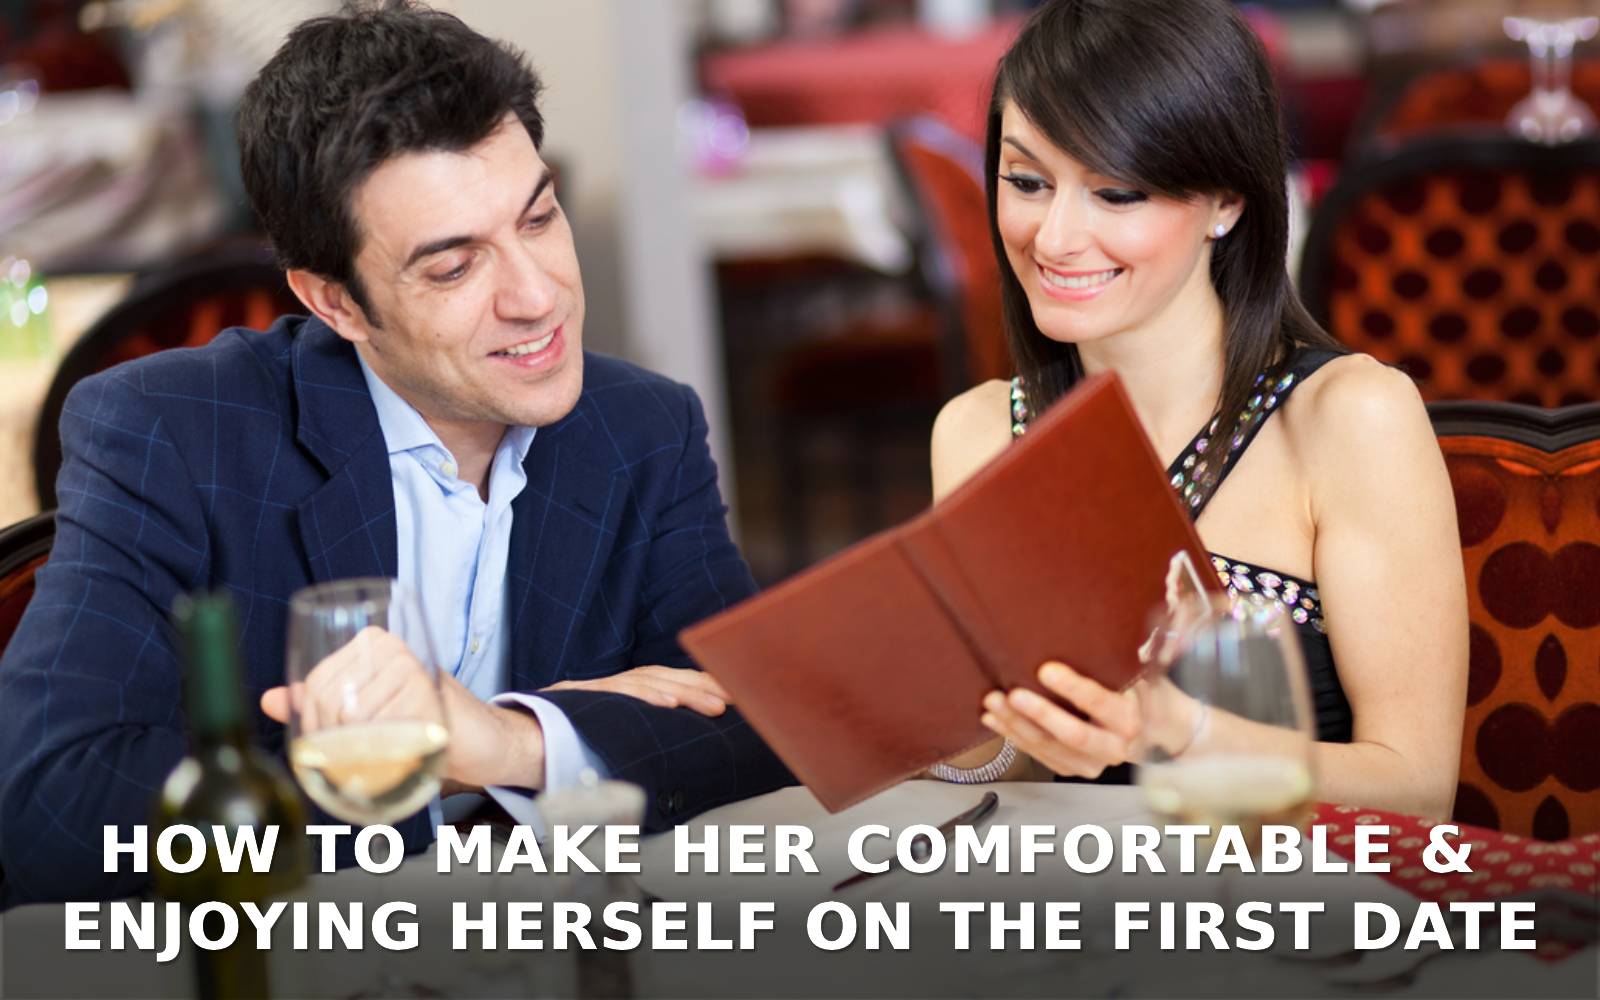 How to Make Her Comfortable and Enjoying Herself on the First Date